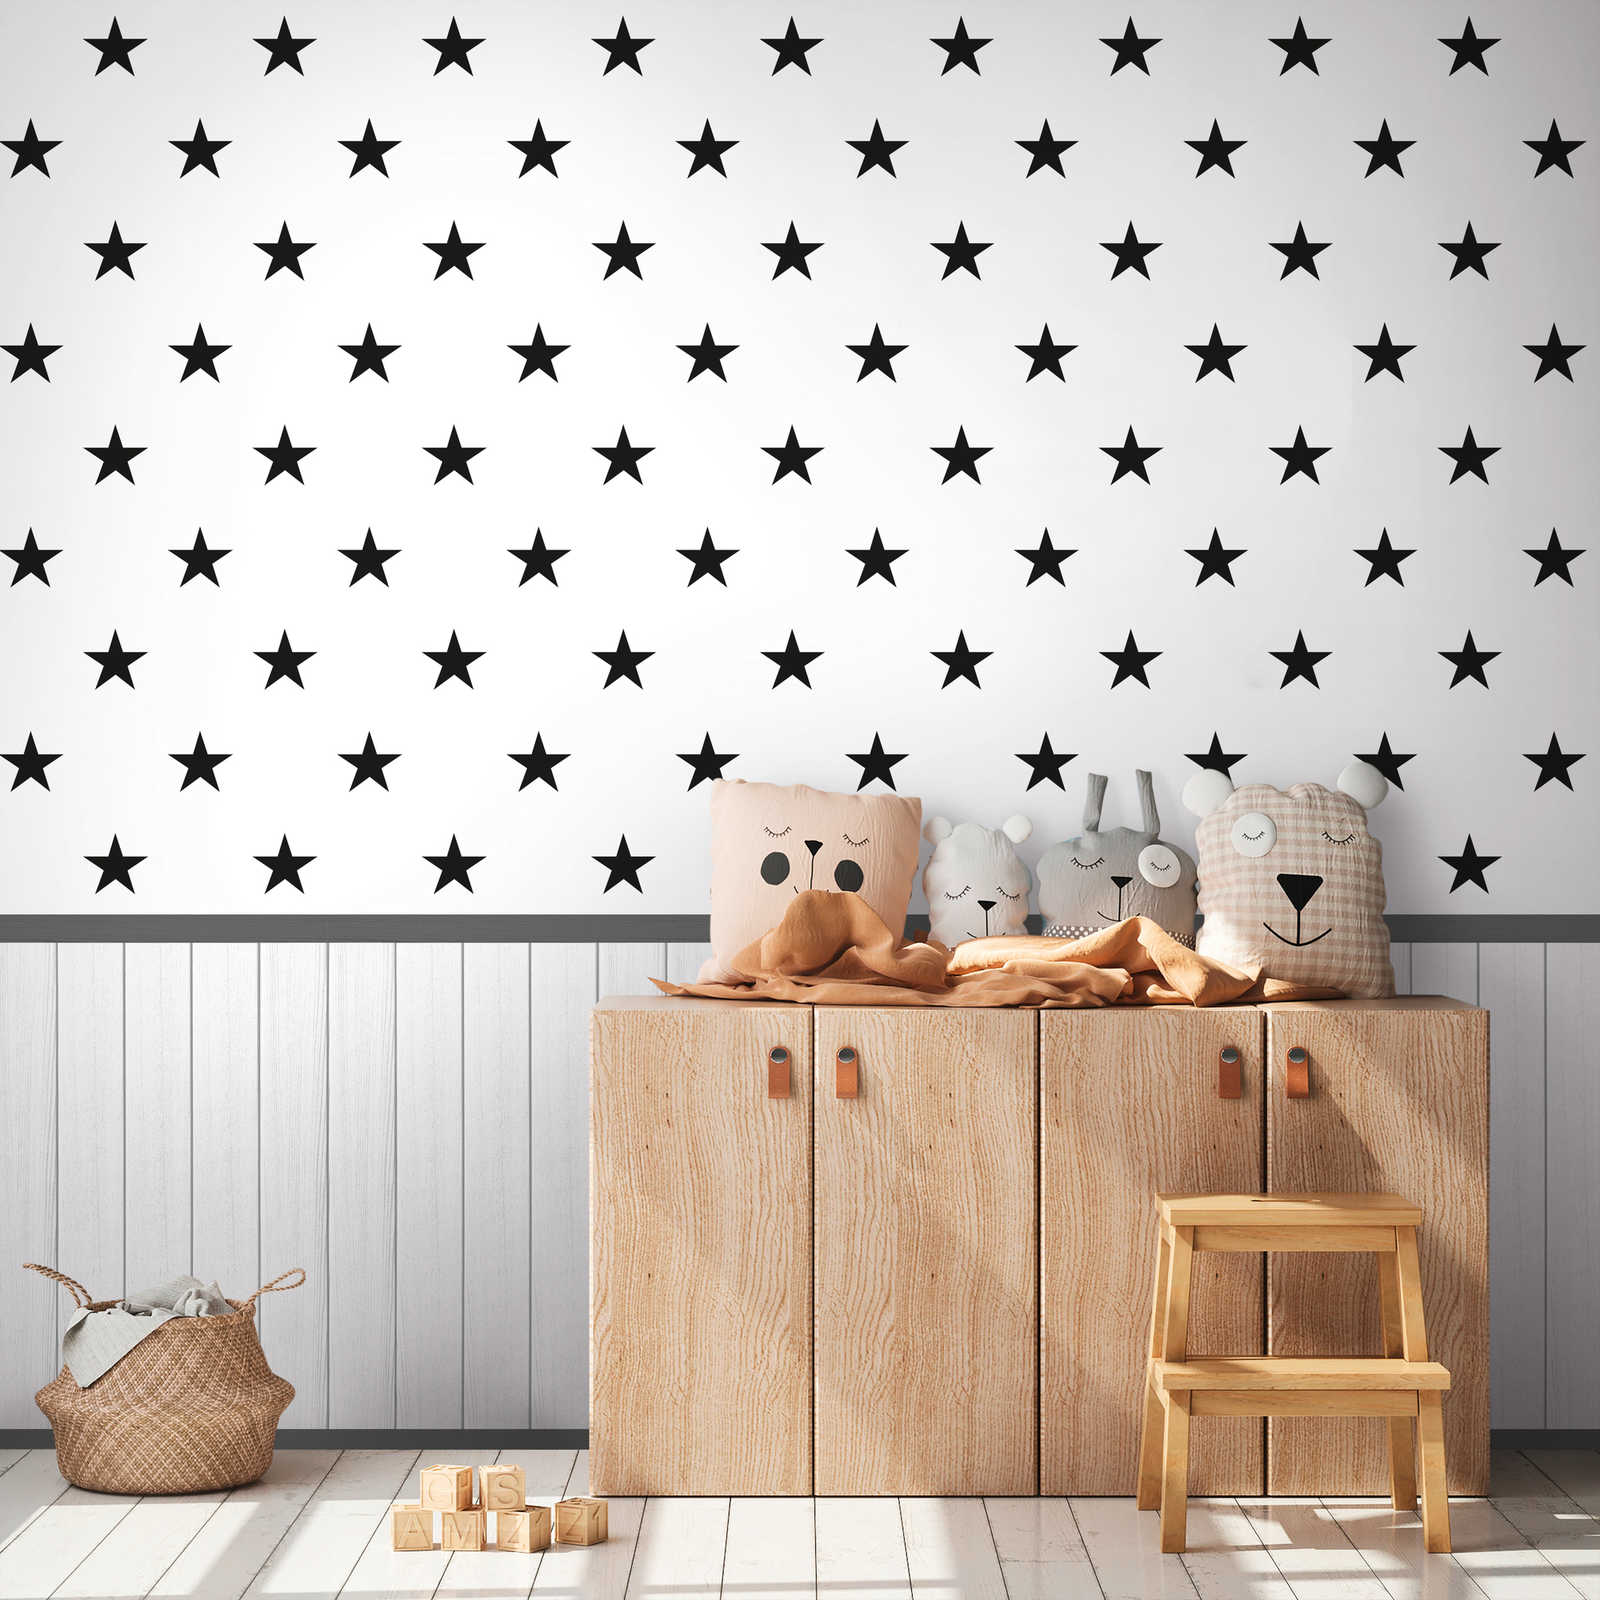 Non-woven motif wallpaper with wood-effect plinth border and check pattern - white, grey, black
